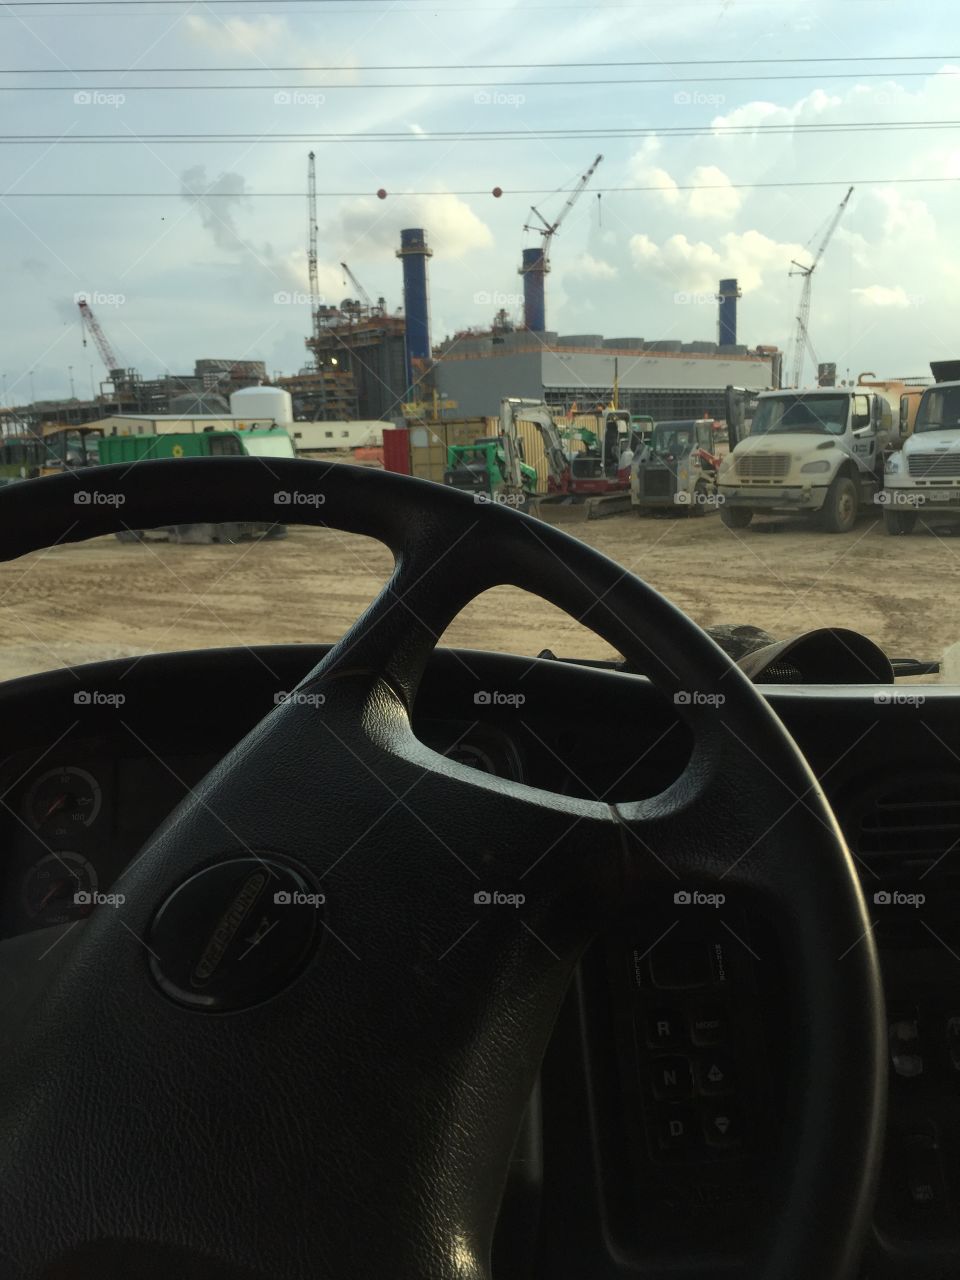 Crystal River, Florida, LNG Power plant Construction Oct/2017 to Dec/2017 view from the truck